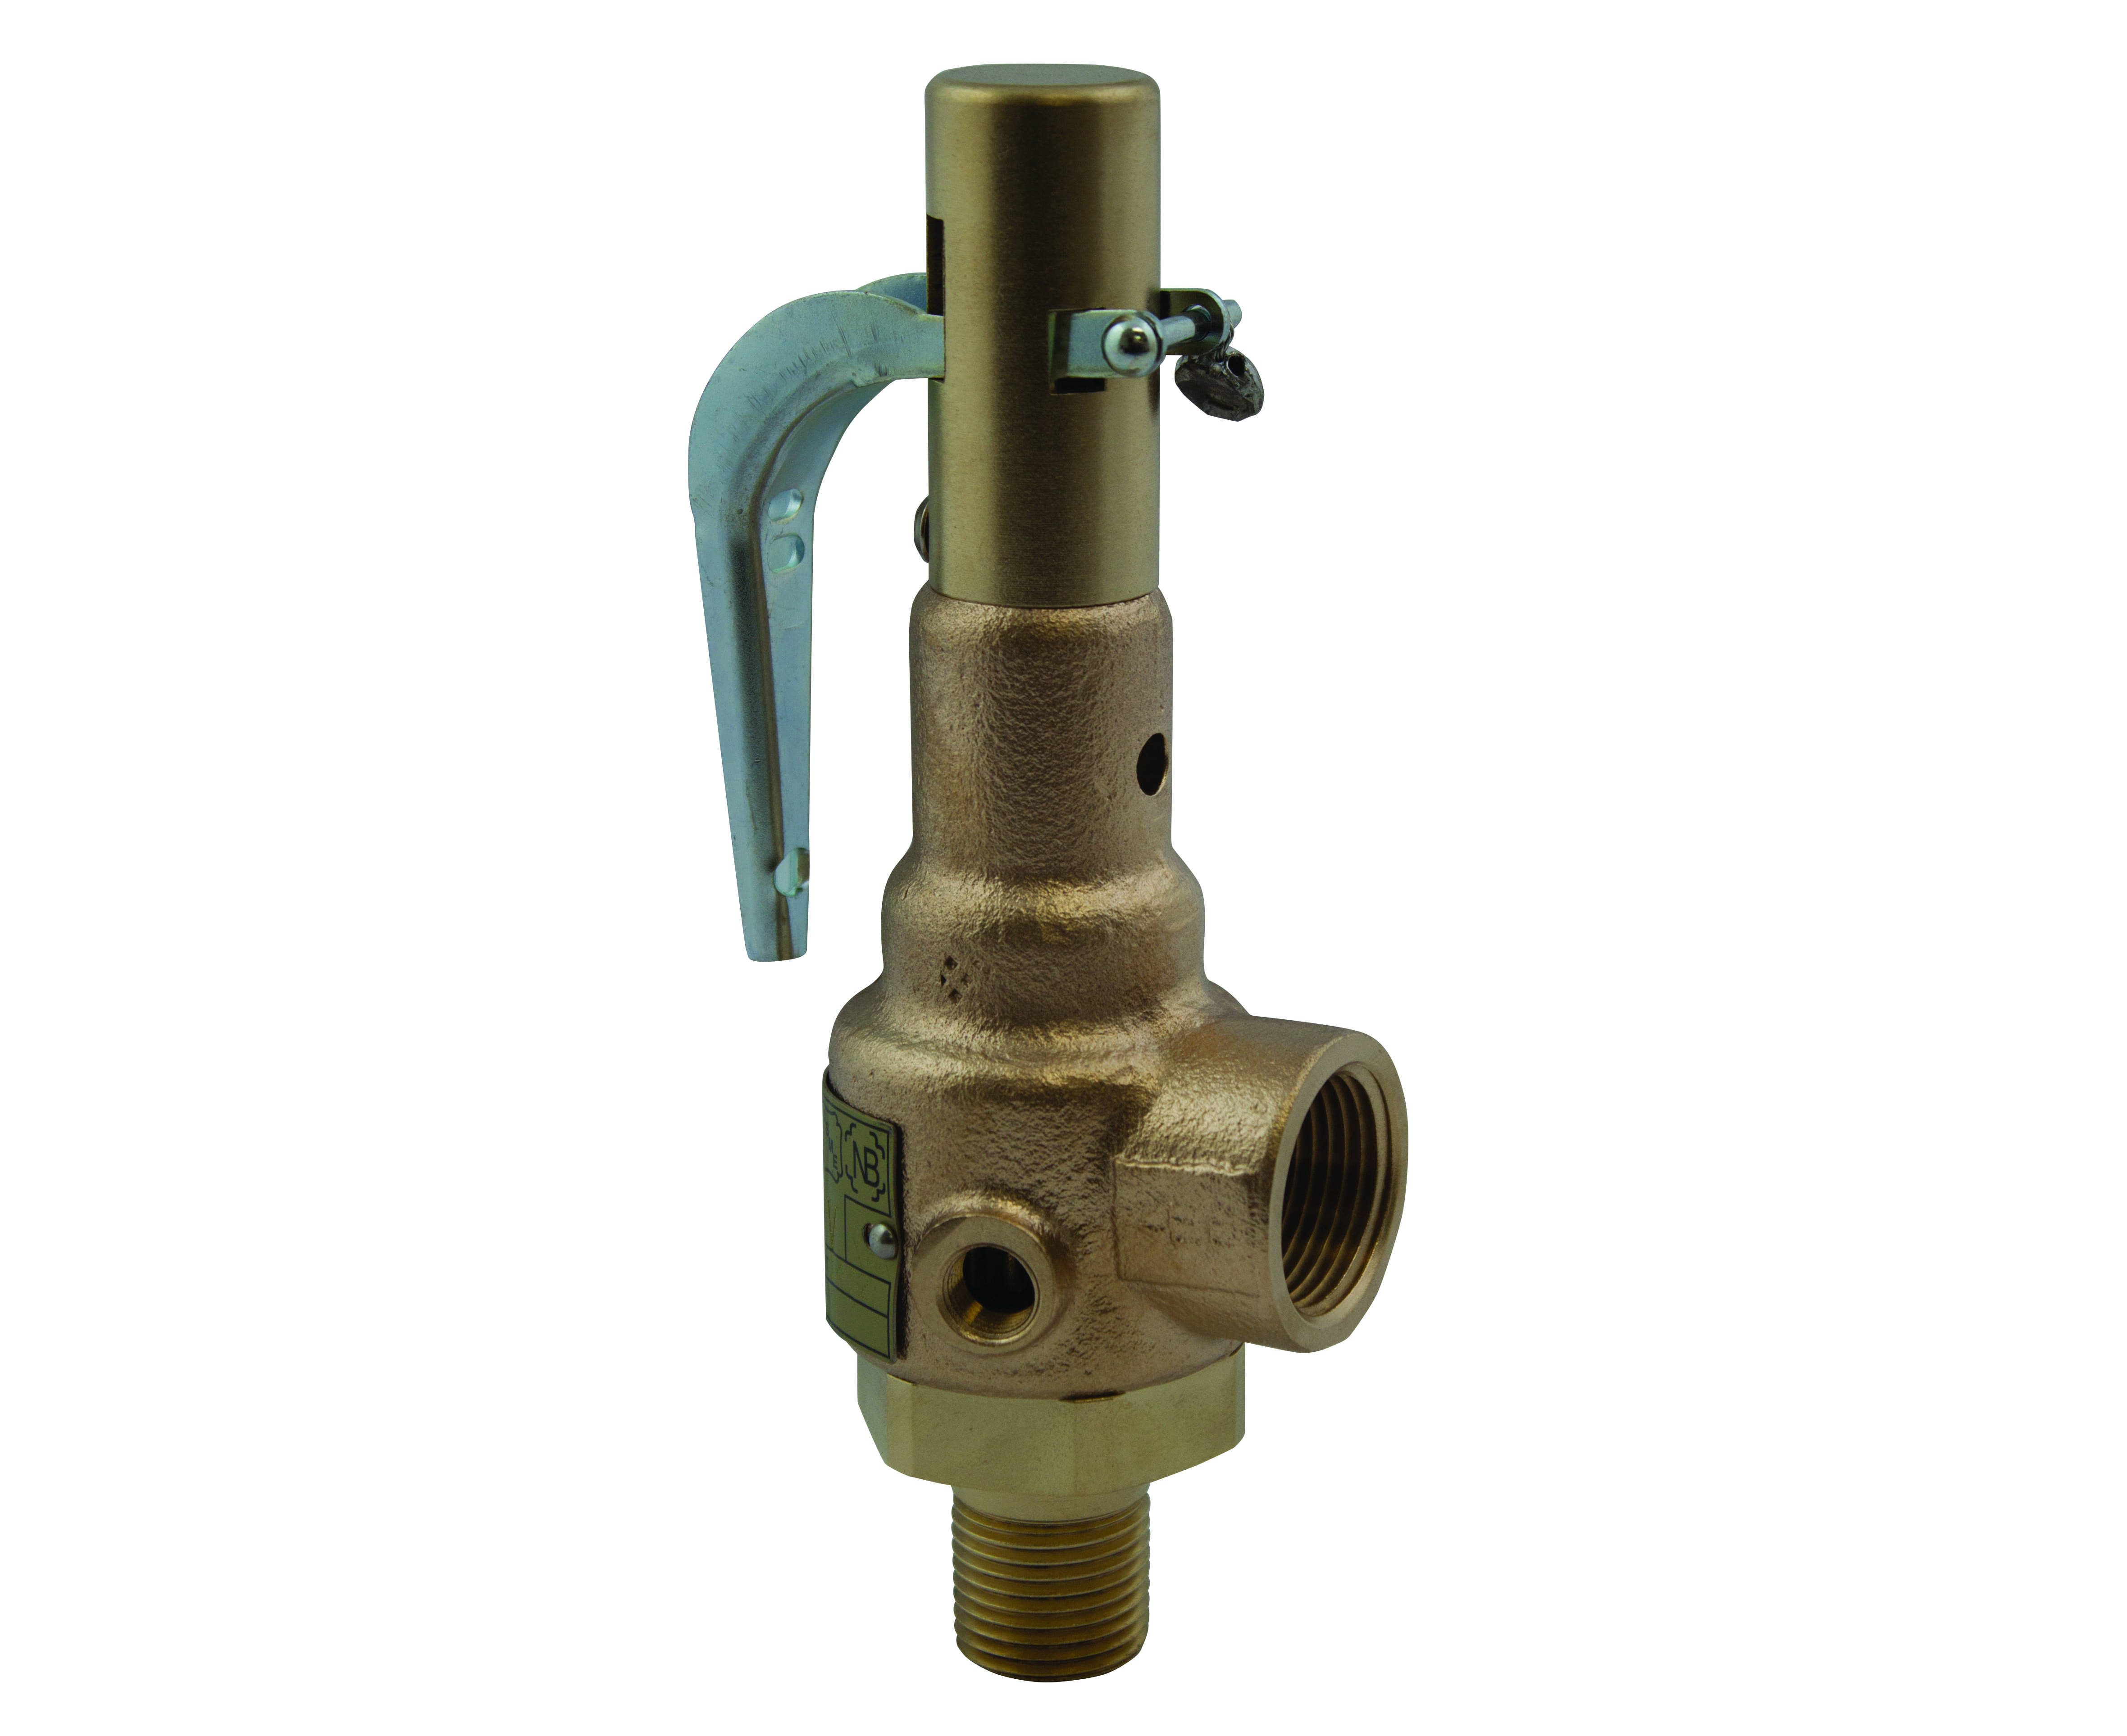 Preview image for Apollo ASME Sec VIII Air Bronze Safety Relief Valves with Brass Trim, Teflon Seat, Anti-Vibration Trim & Performance Test Reports Included, 1-1/2" x 2" (MNPT x FNPT)